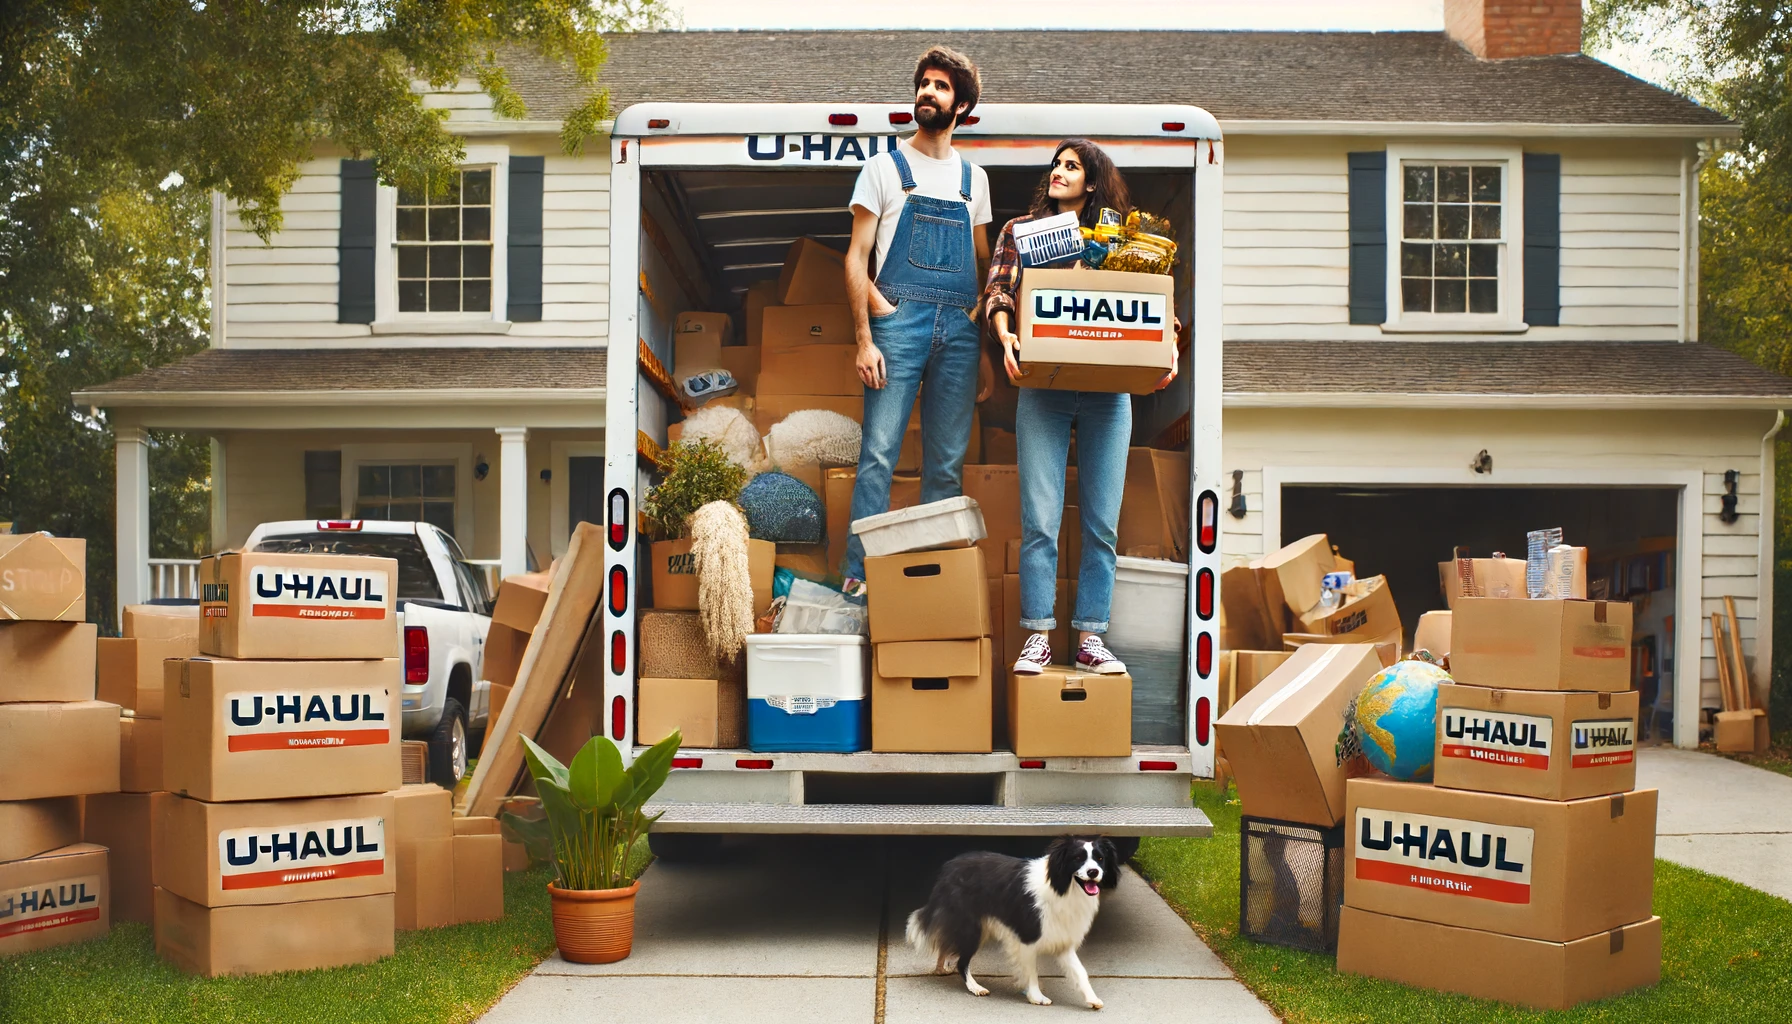 DALL·E 2024 06 17 14.12.41 A couple unloading an overpacked U Haul truck at their new home. The truck is full of boxes and furniture, with items spilling out slightly. The coupl